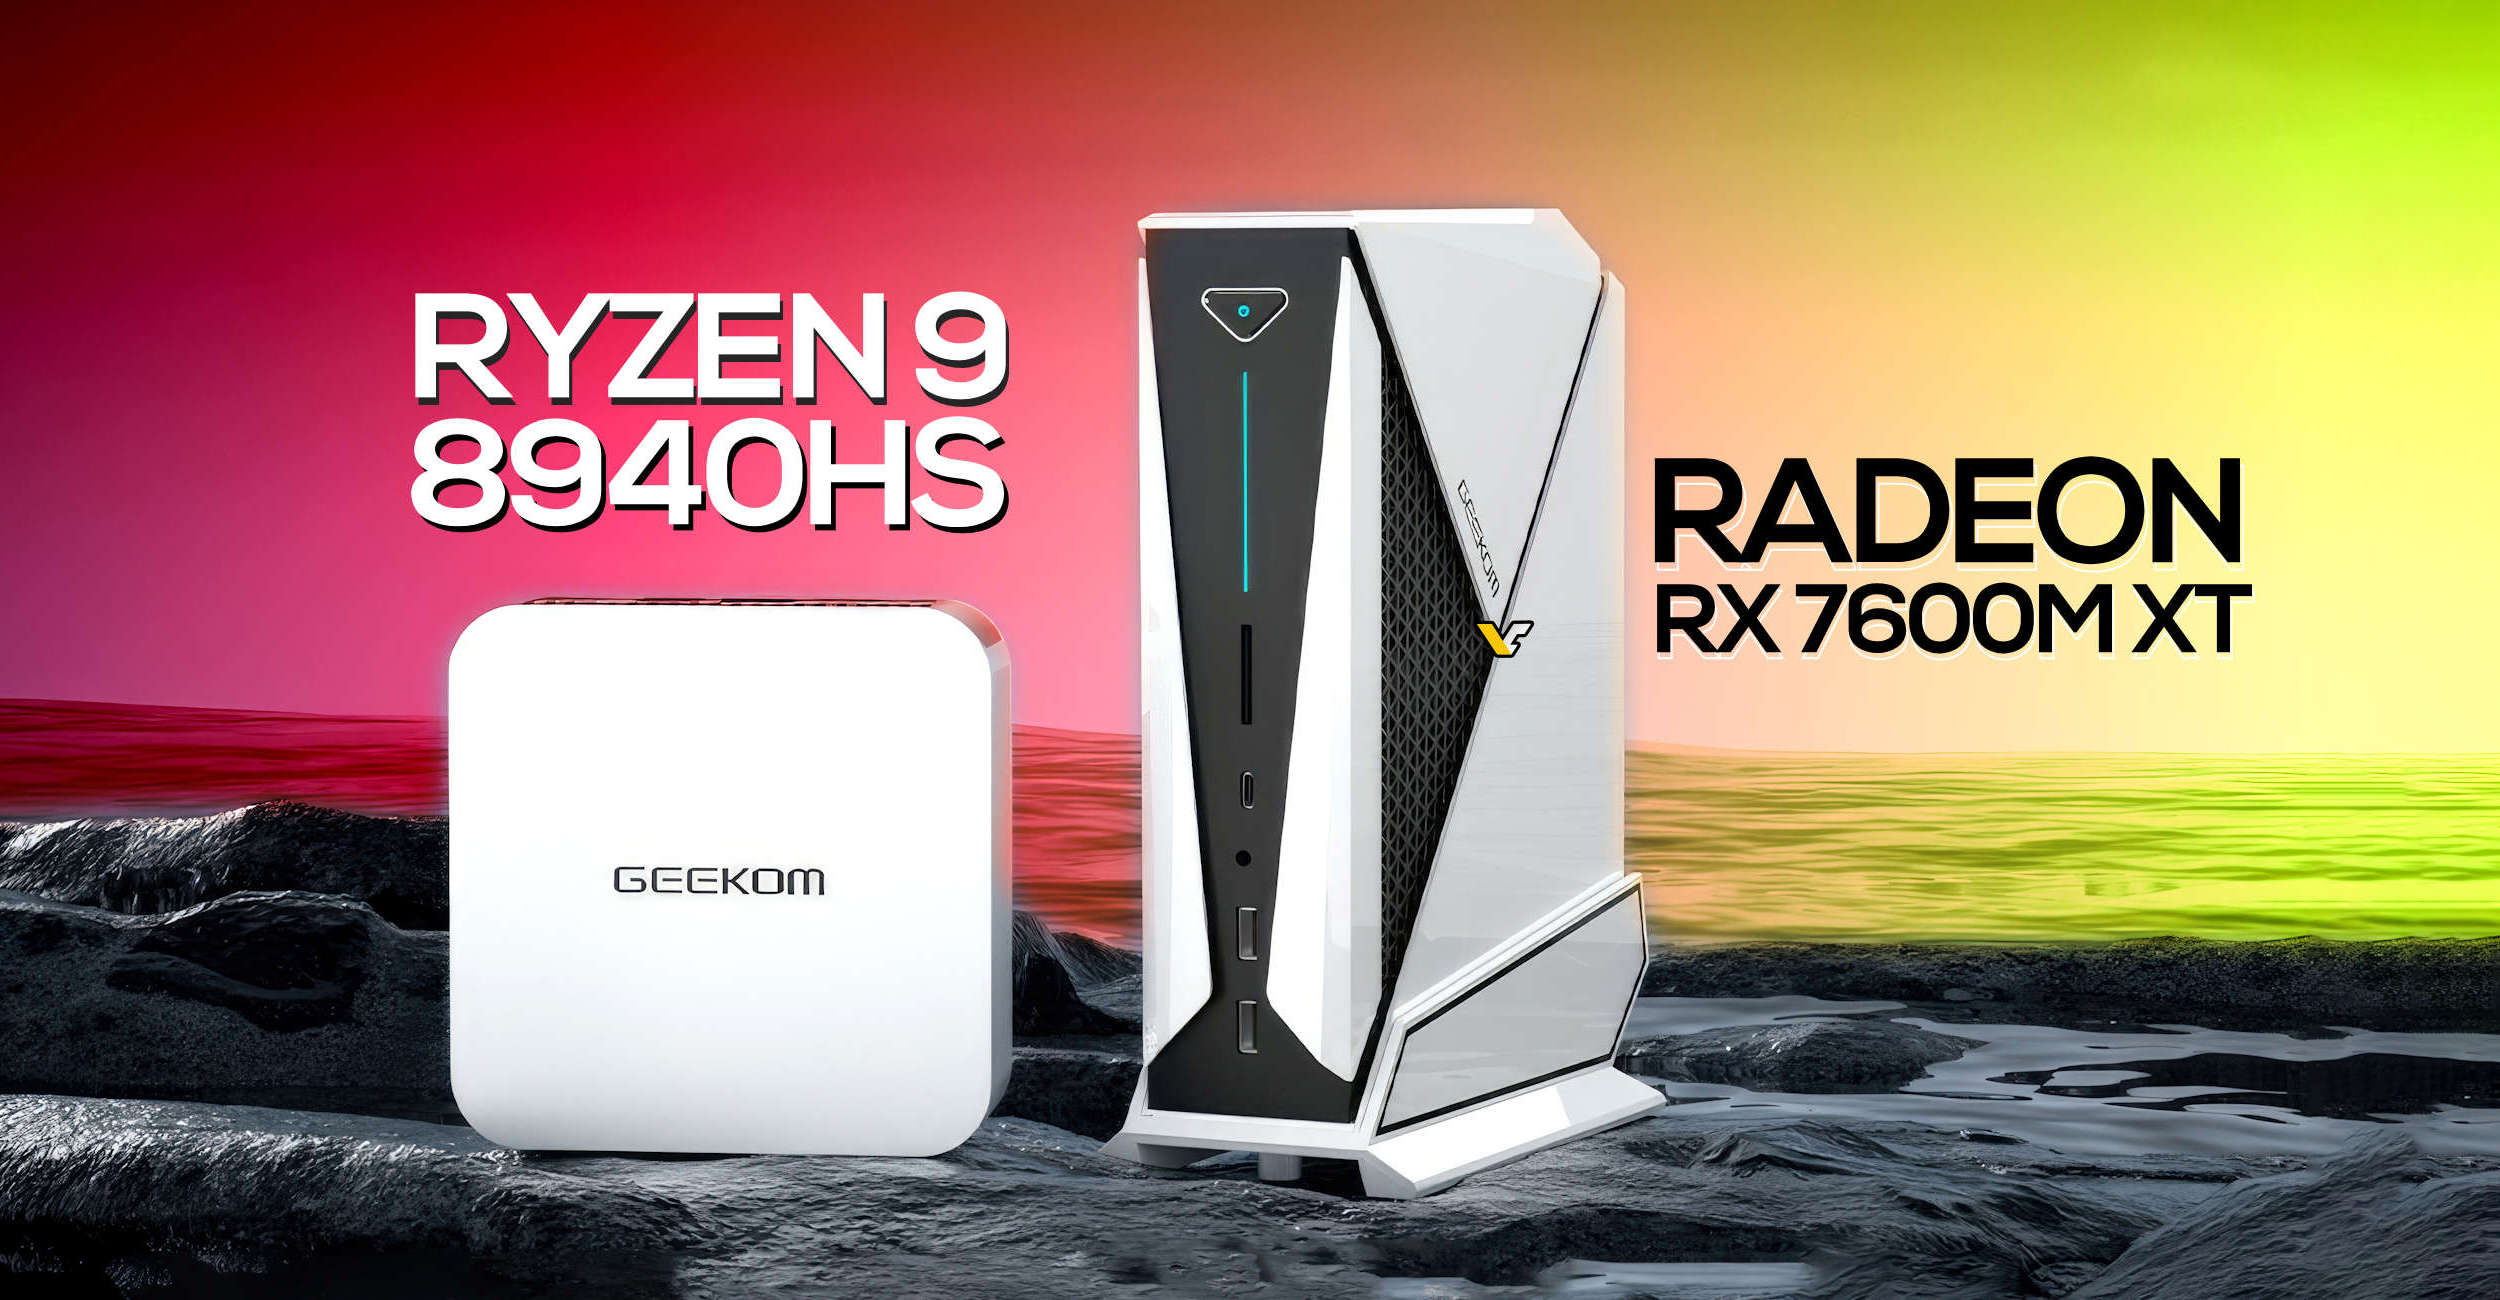 GEEKOM PC on X: Super-powerful GEEKOM AS 6 is powered by AMD CPU - AMD  Ryzen™ 9 6900HX & AMD Radeon™ Graphics 680M, which makes AS 6  unstoppable😎😎 Which of the following